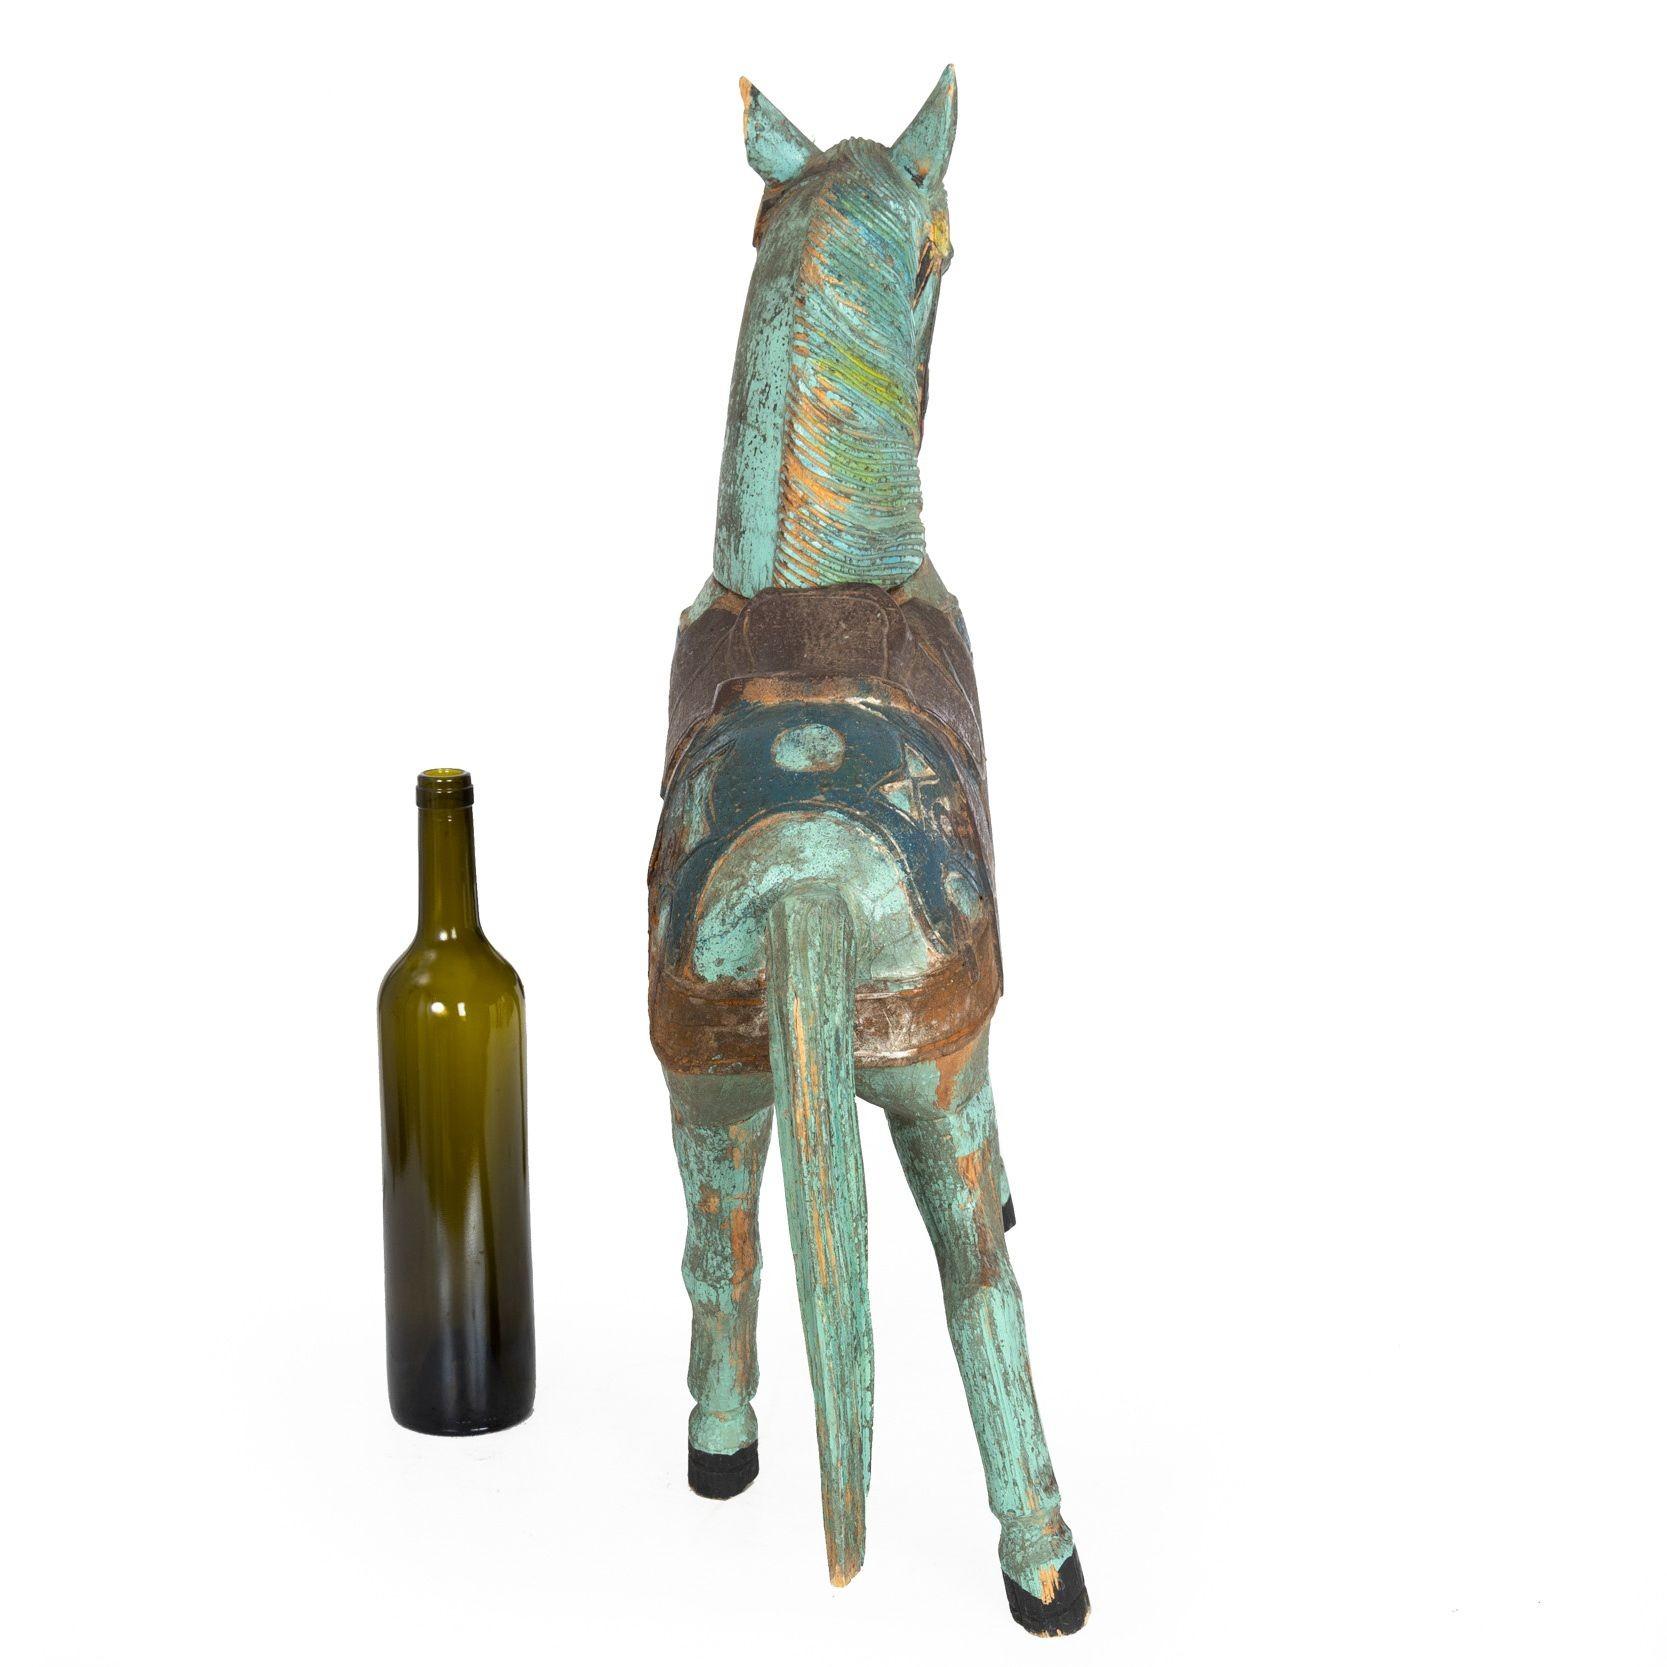 20th Century Folk Art Beautifully Hand Carved and Painted Horse Sculpture, United States For Sale